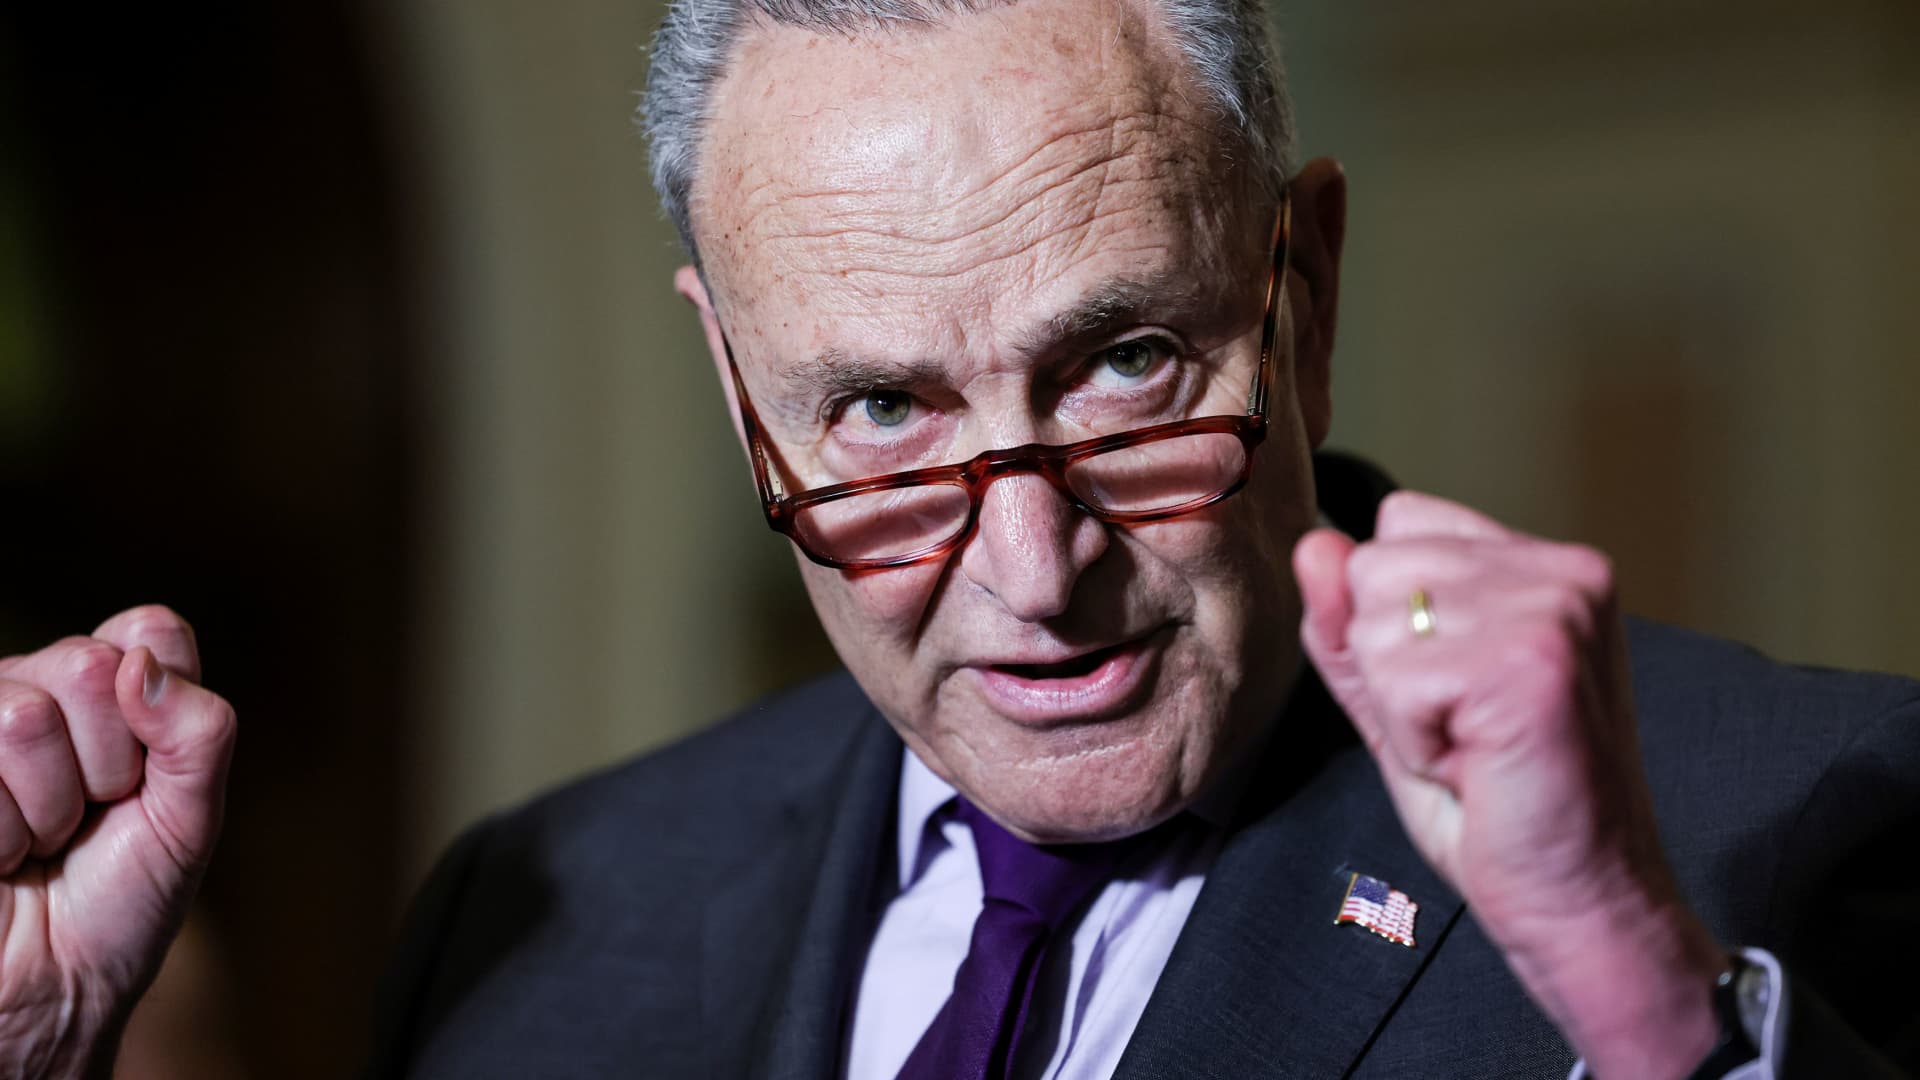 U.S. Senate Majority Leader Chuck Schumer (D-NY) talks to reporters following the Senate Democrats weekly policy lunch at the U.S. Capitol in Washington, June 15, 2021.